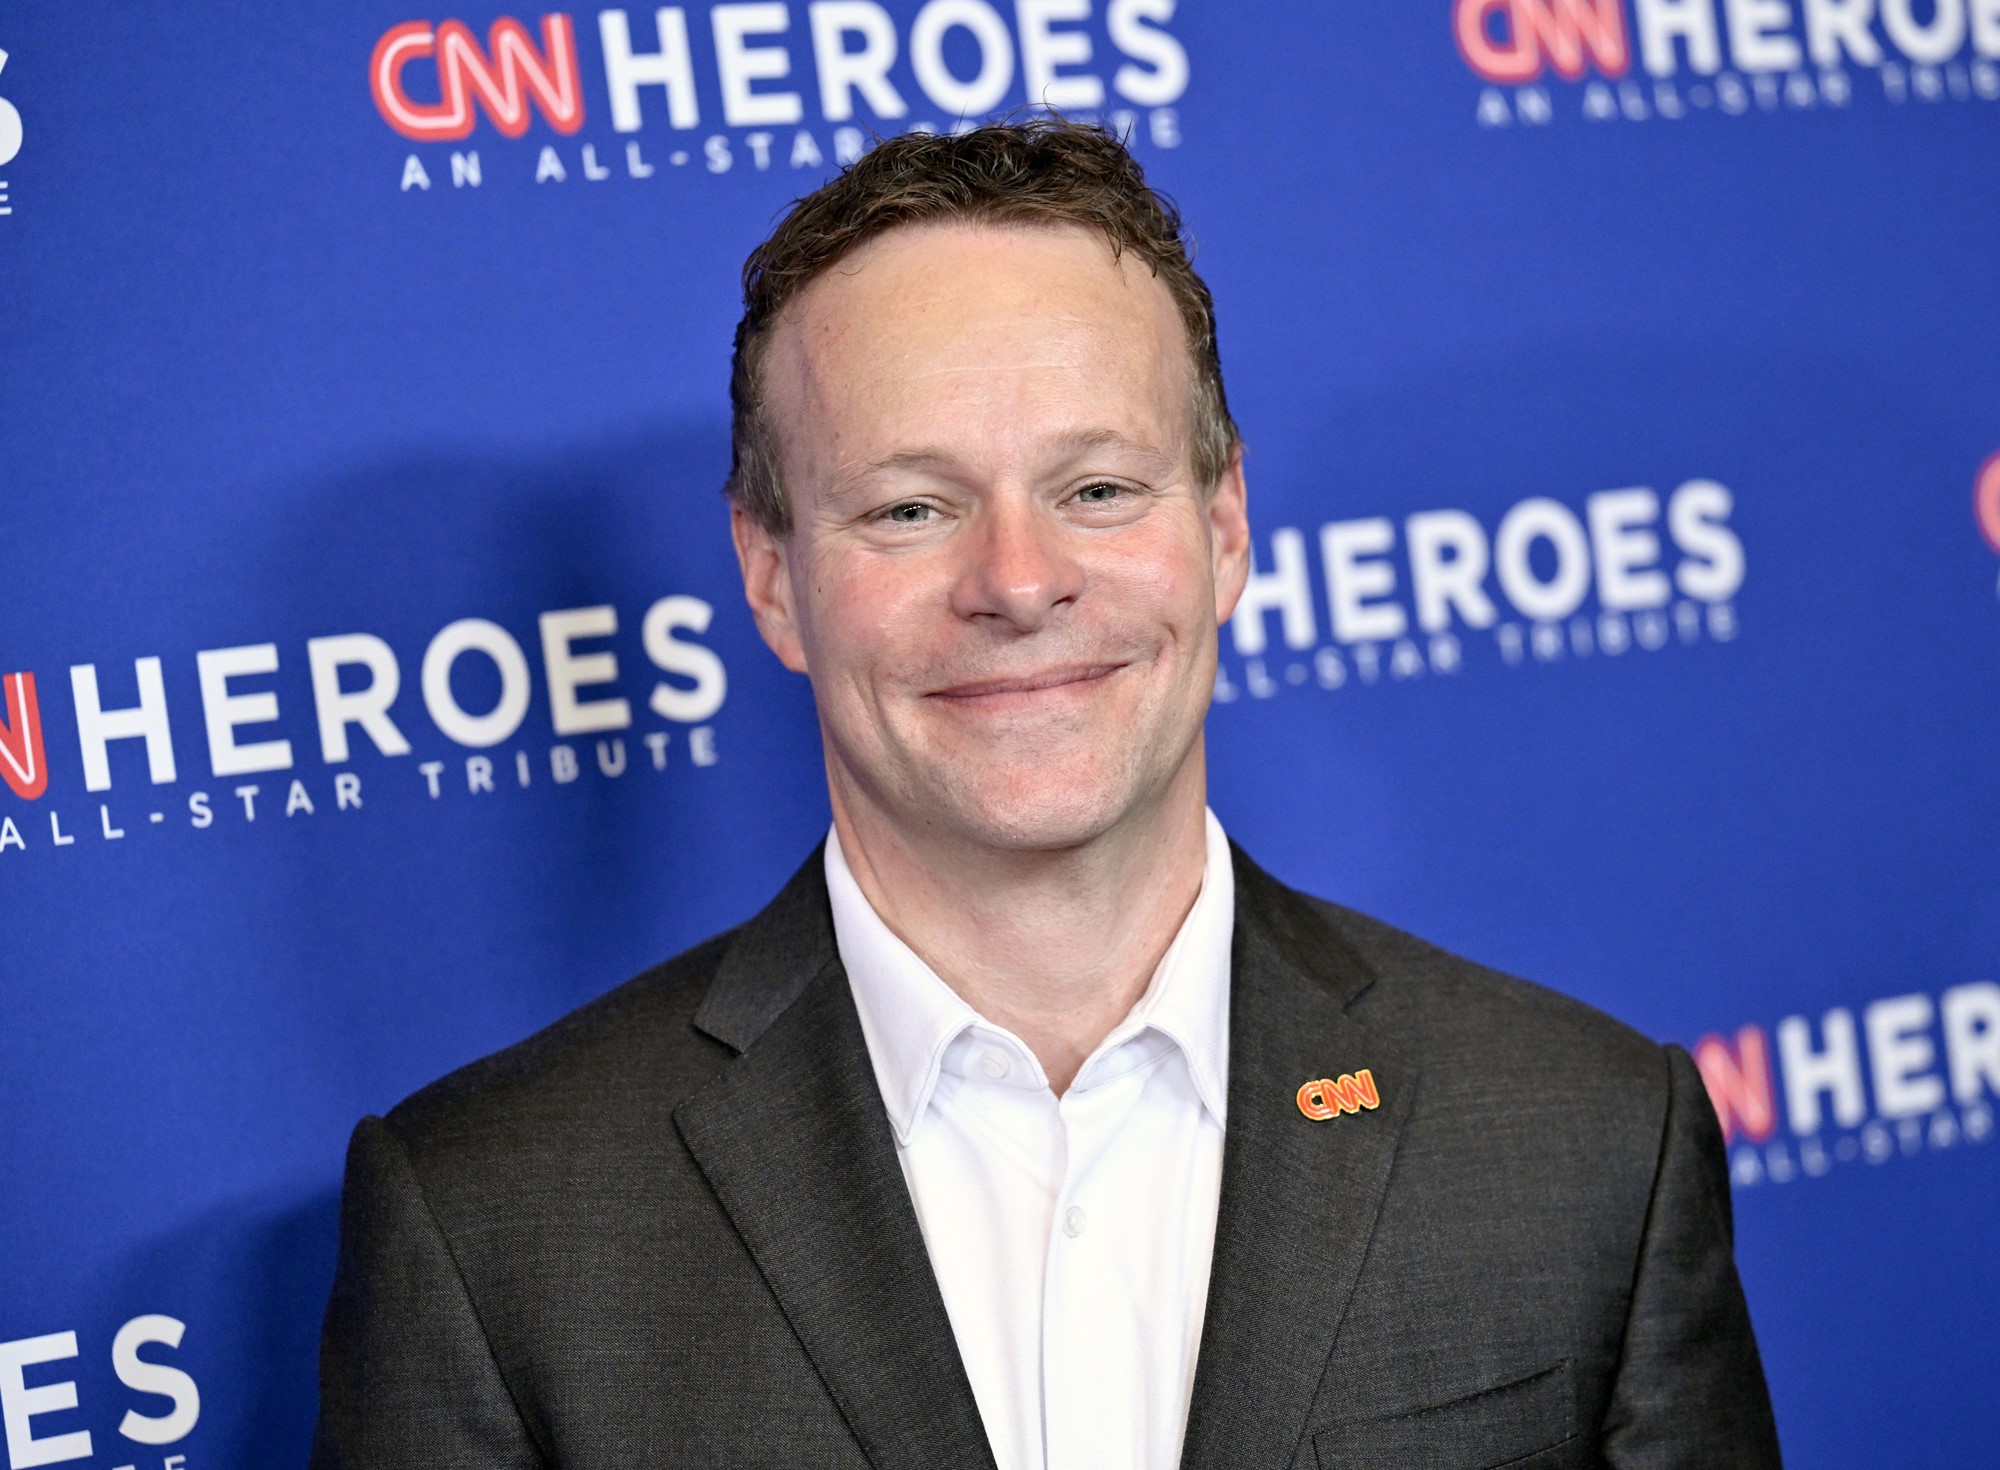 A white man with short hair smiles while wearing a suit with a CNN pin on it